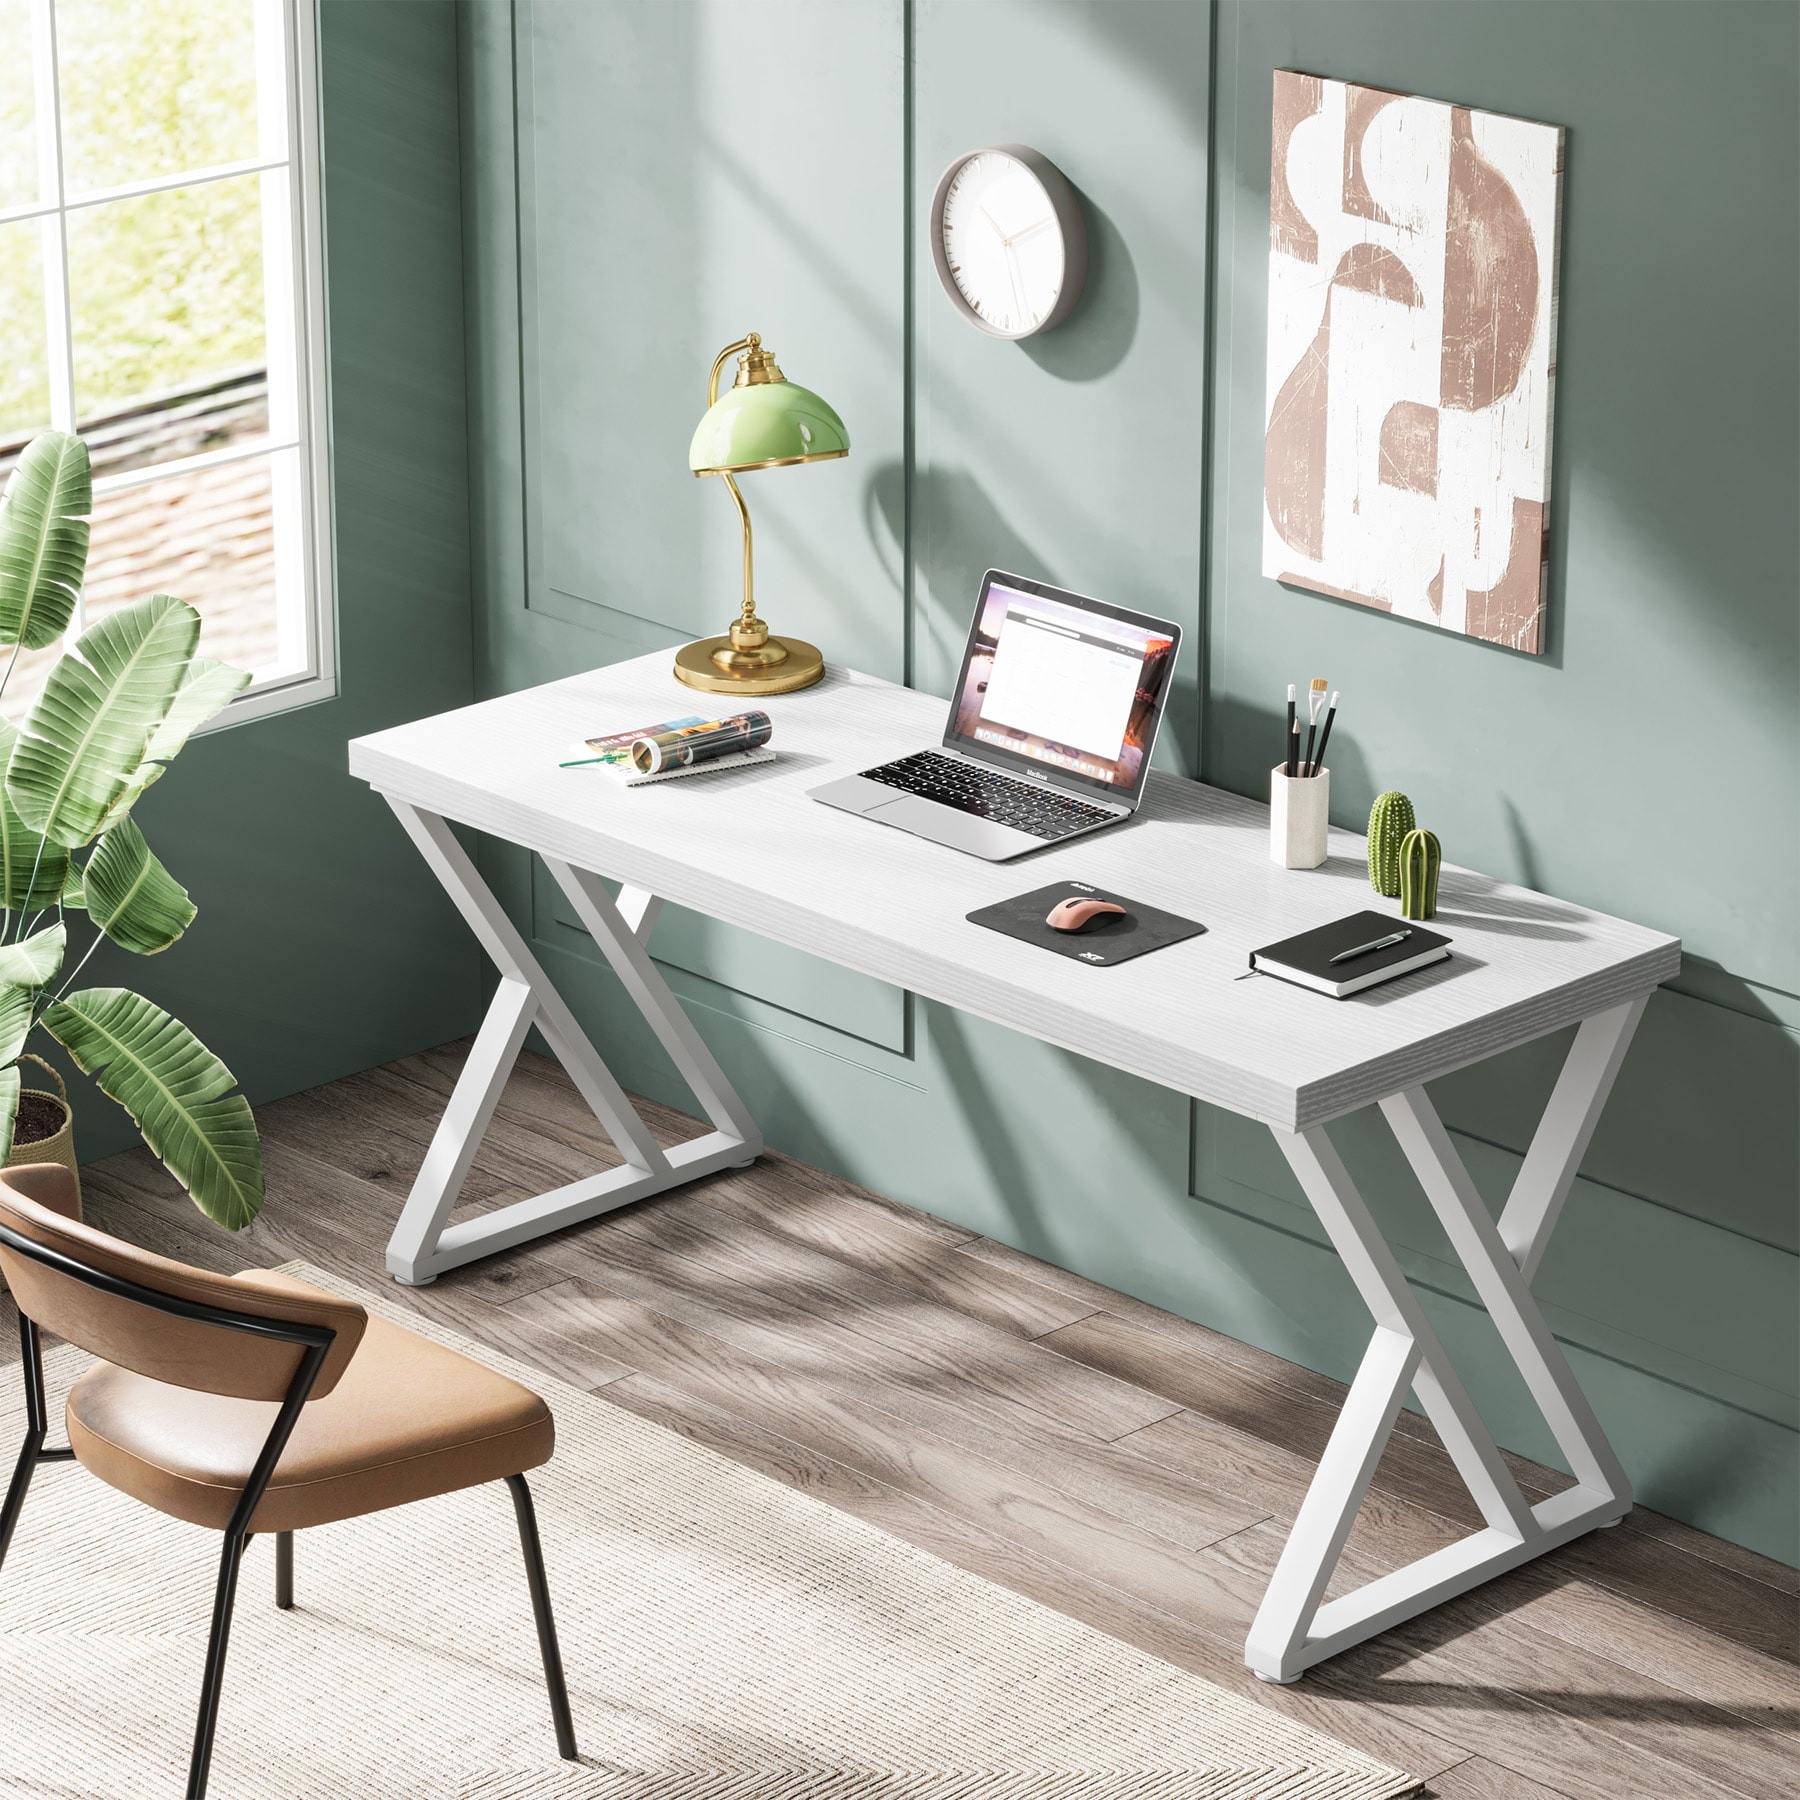  NA Glass Computer Desk with Metal Frame, Home Office